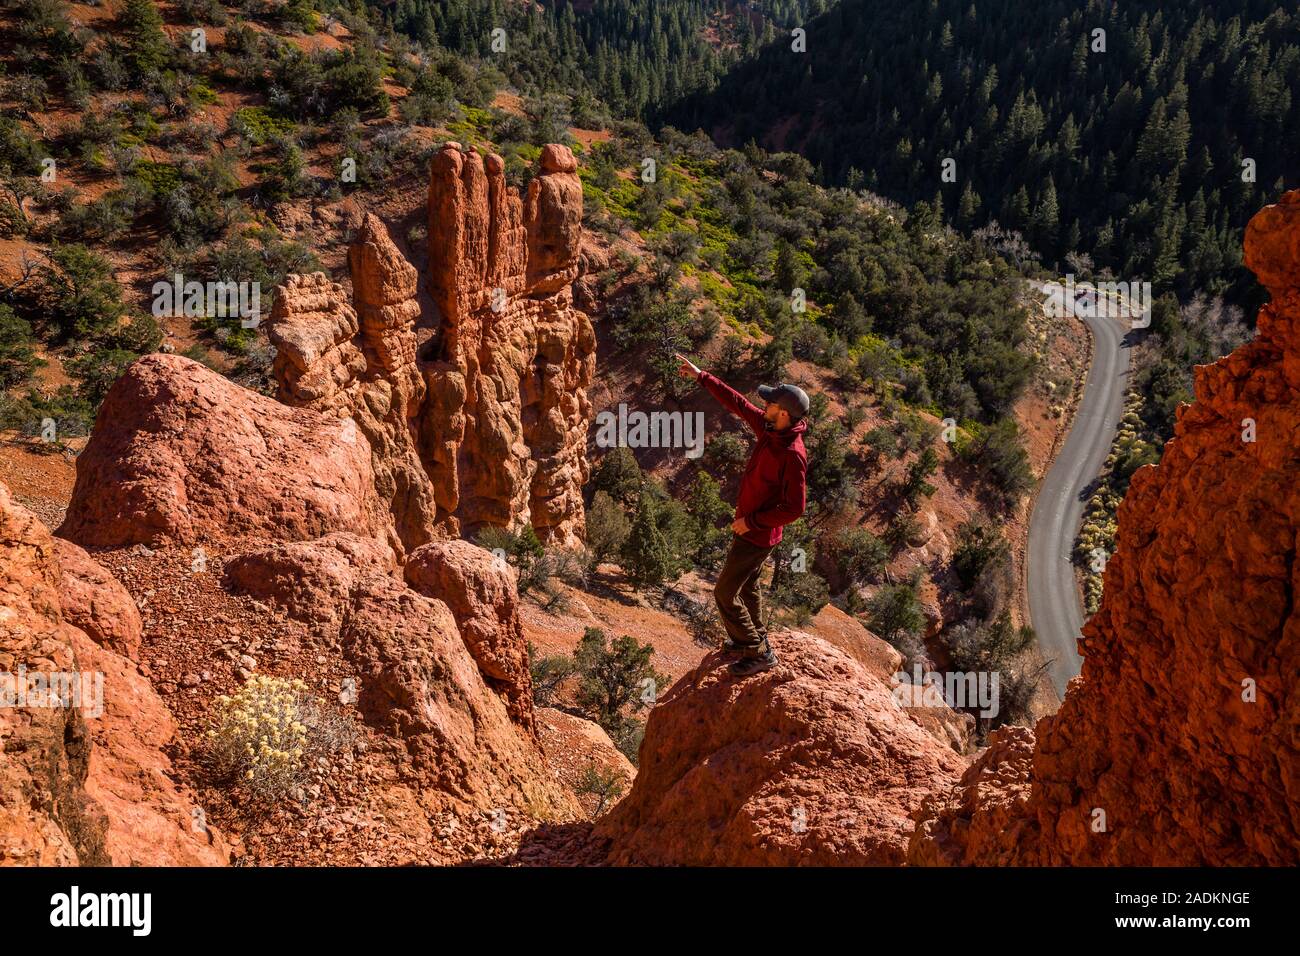 Looking down on a hiker pointing upward among red rock hoodoo tower formations of southern Utah near Bryce Canyon. Stock Photo